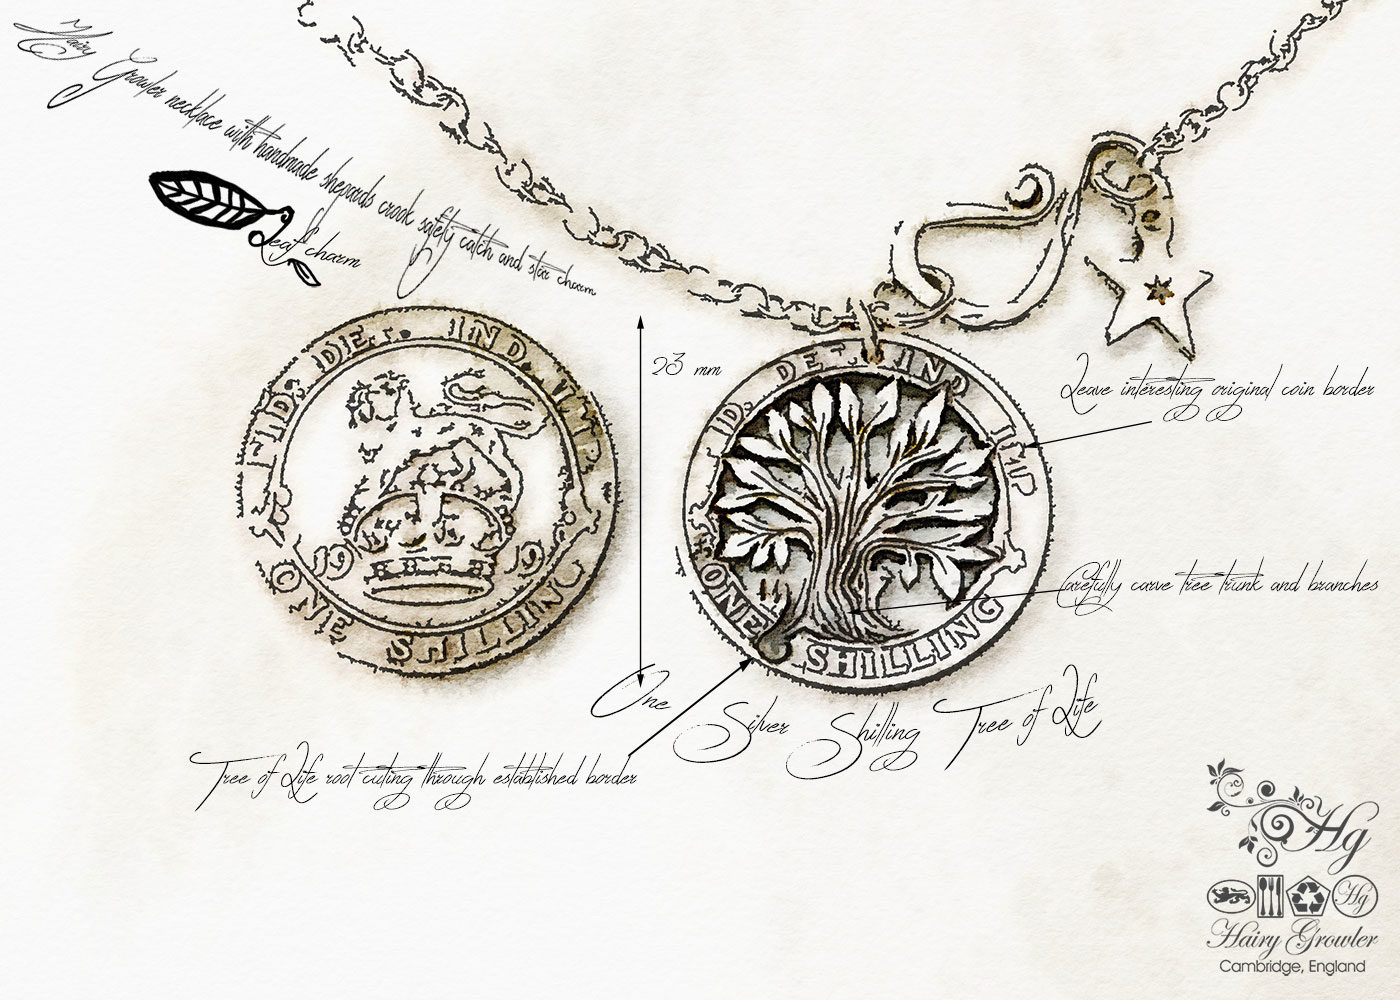 The Silver Shilling collection. silver tree-of-life necklace totally handcrafted and recycled from old sterling silver shilling coins. Designed and created by Hairy Growler Jewellery, Cambridge, UK